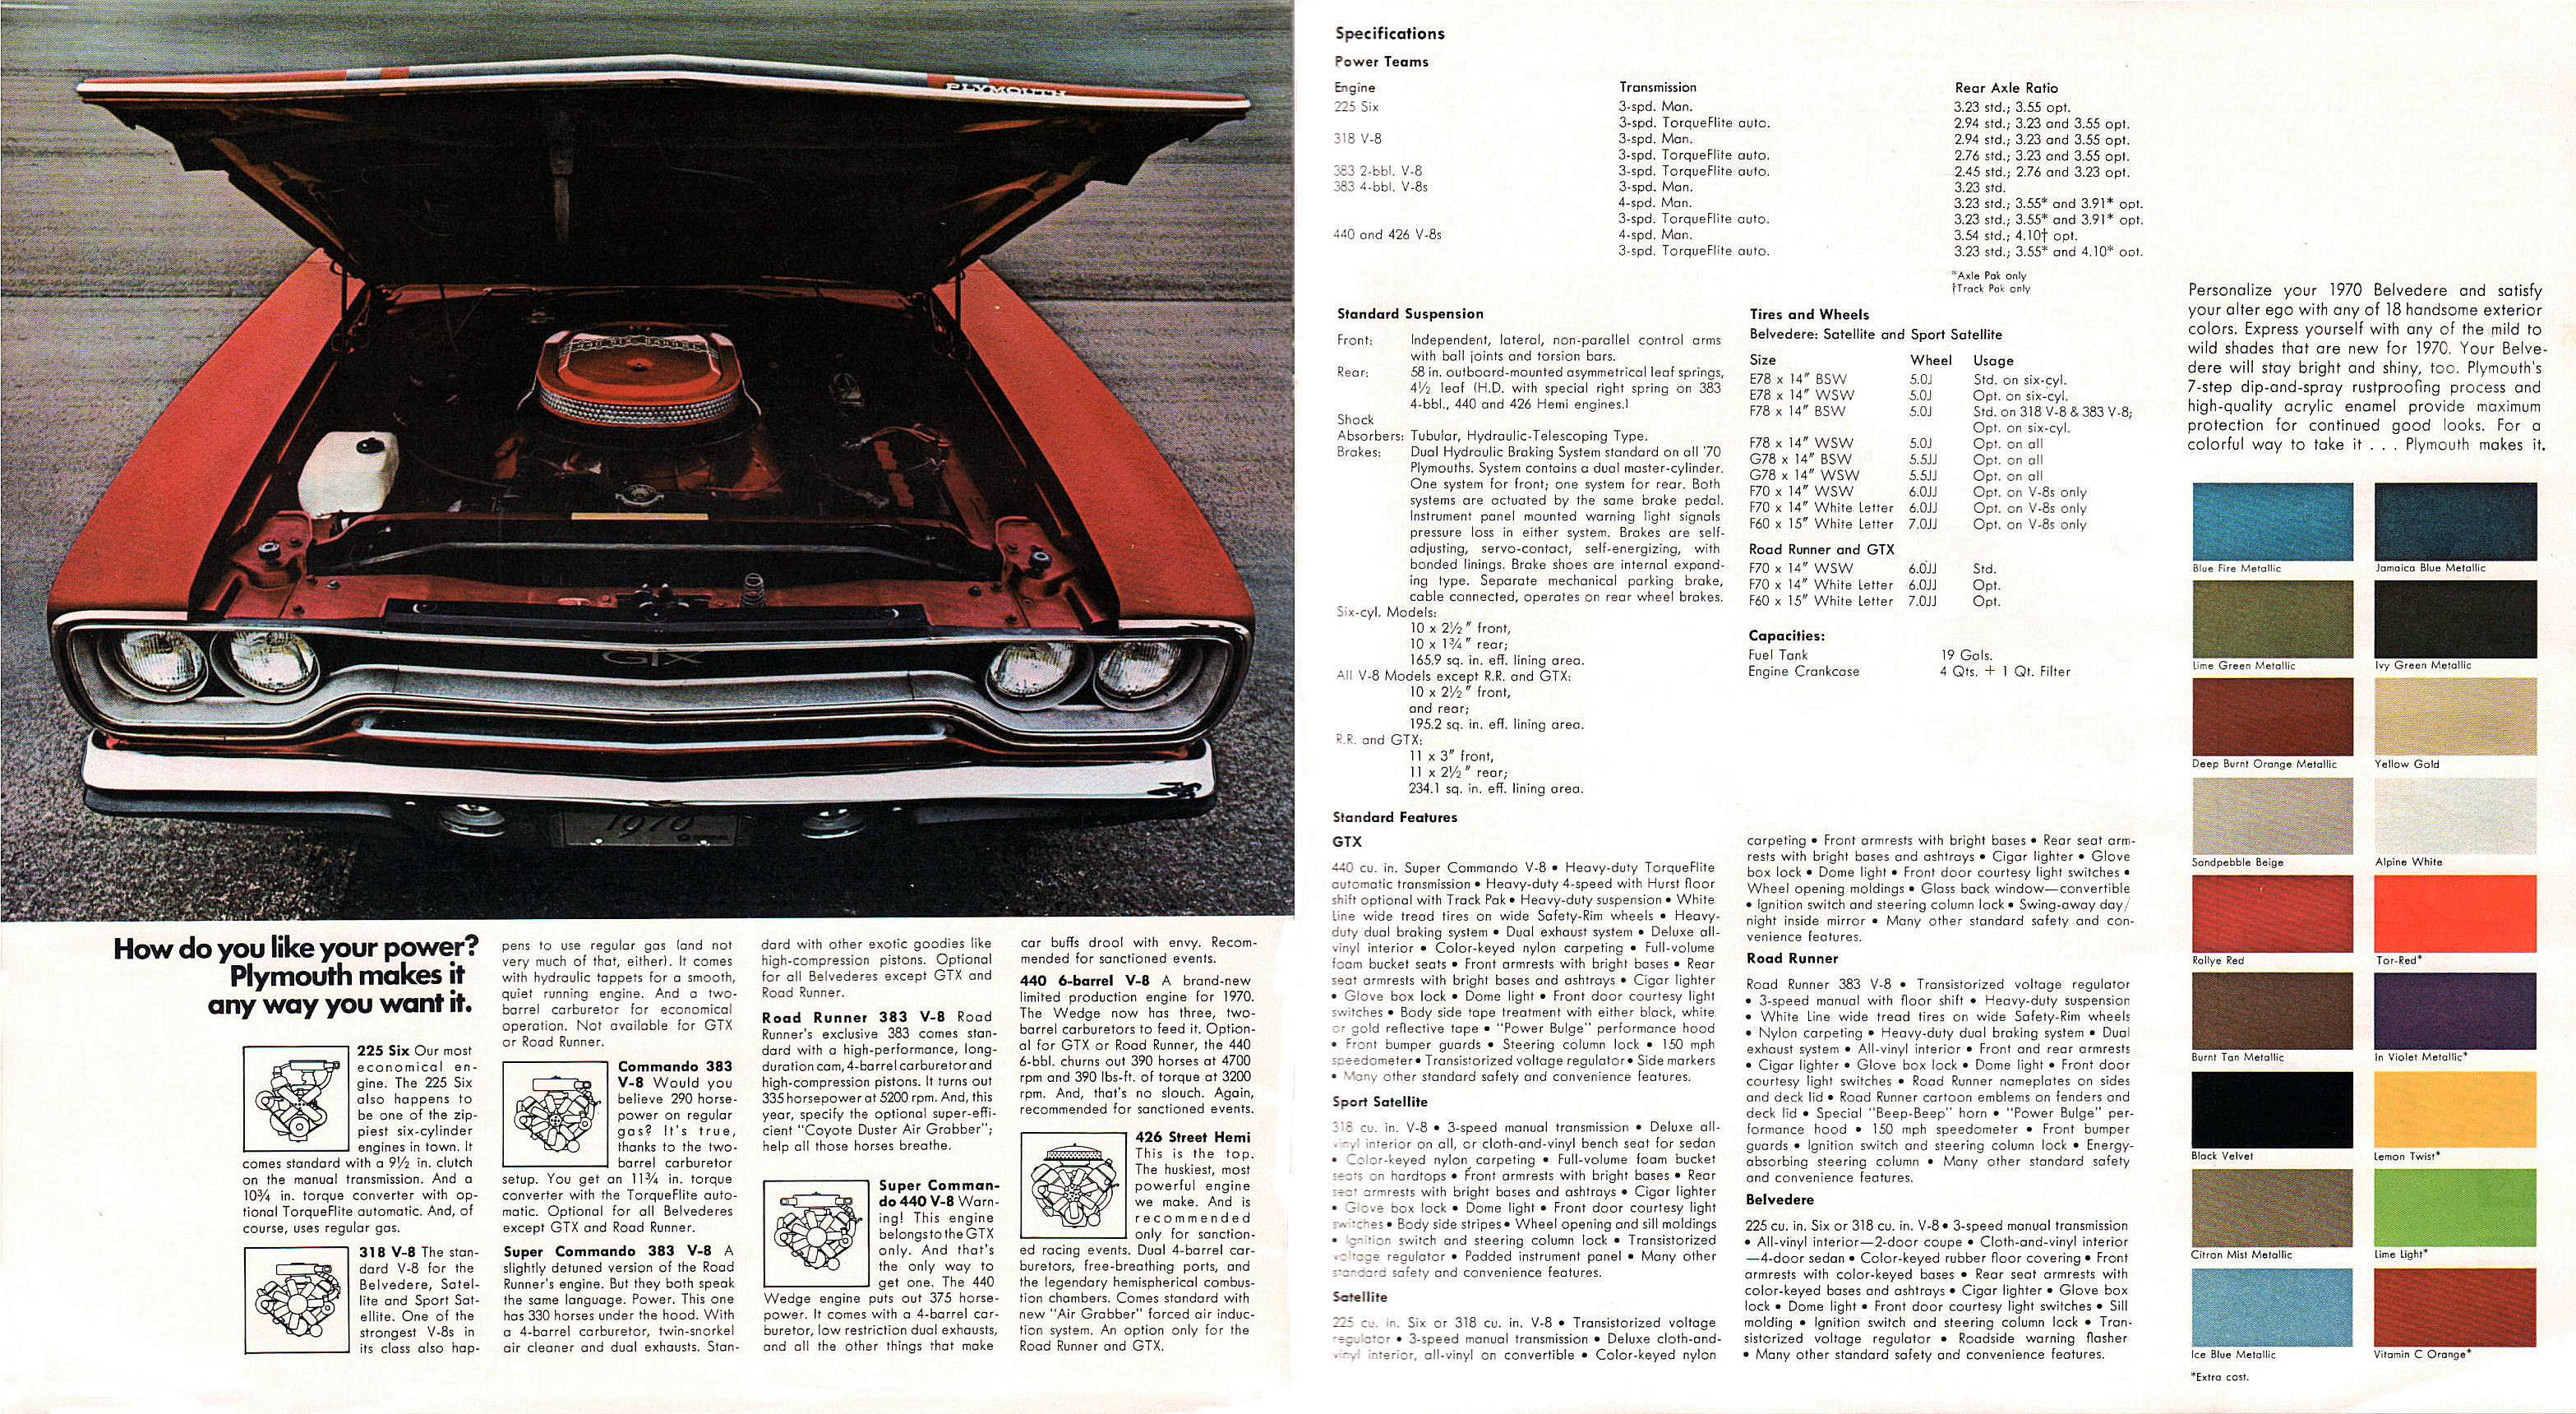 1970_Plymouth_Belvedere-18-19